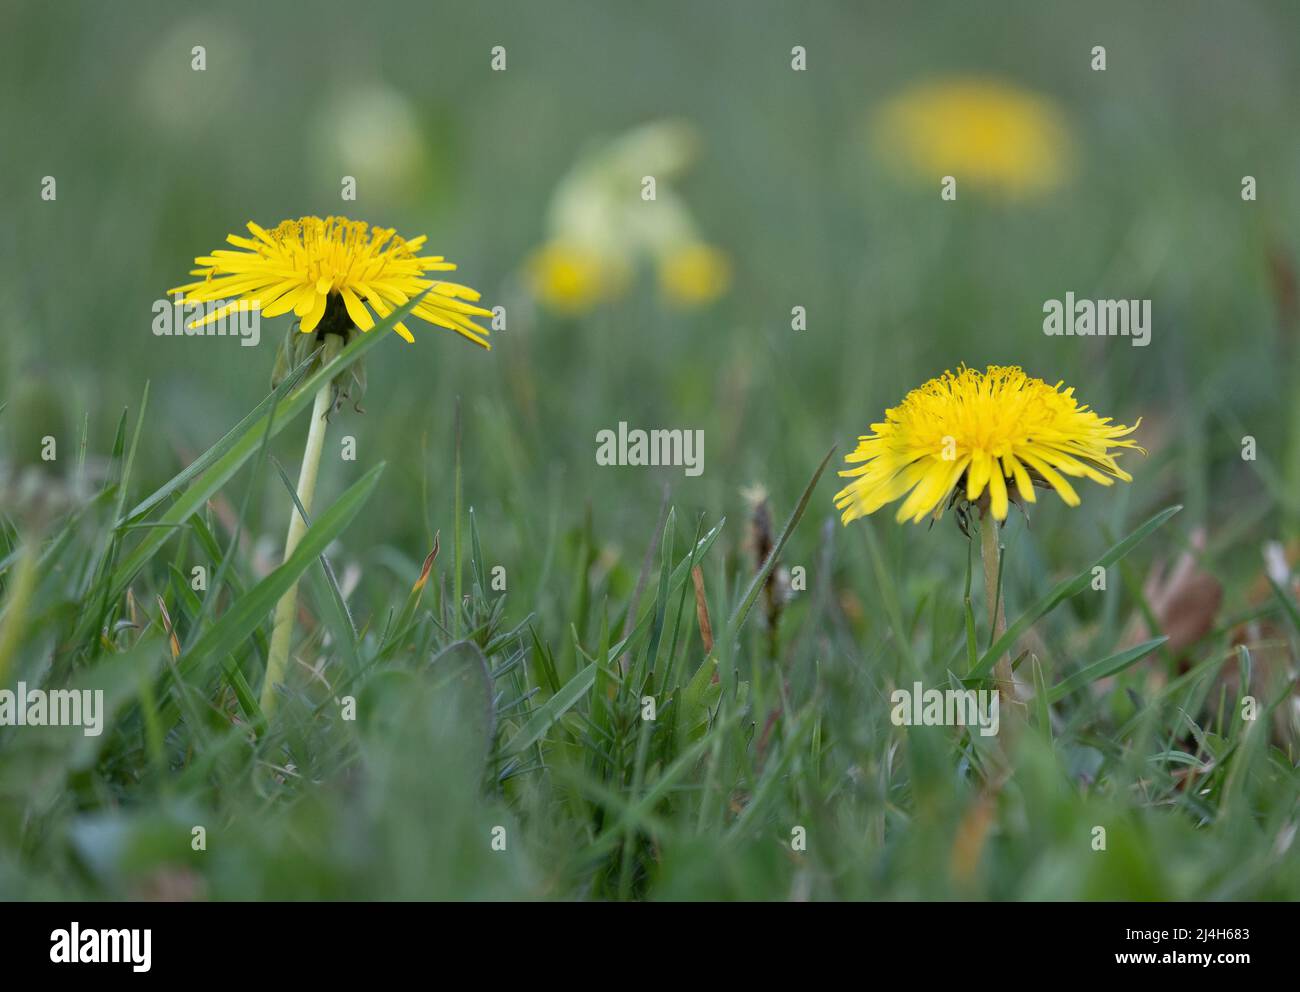 First of the common Dandelion flowers flowering in Spring in a meadow, Worcestershire, England. Stock Photo